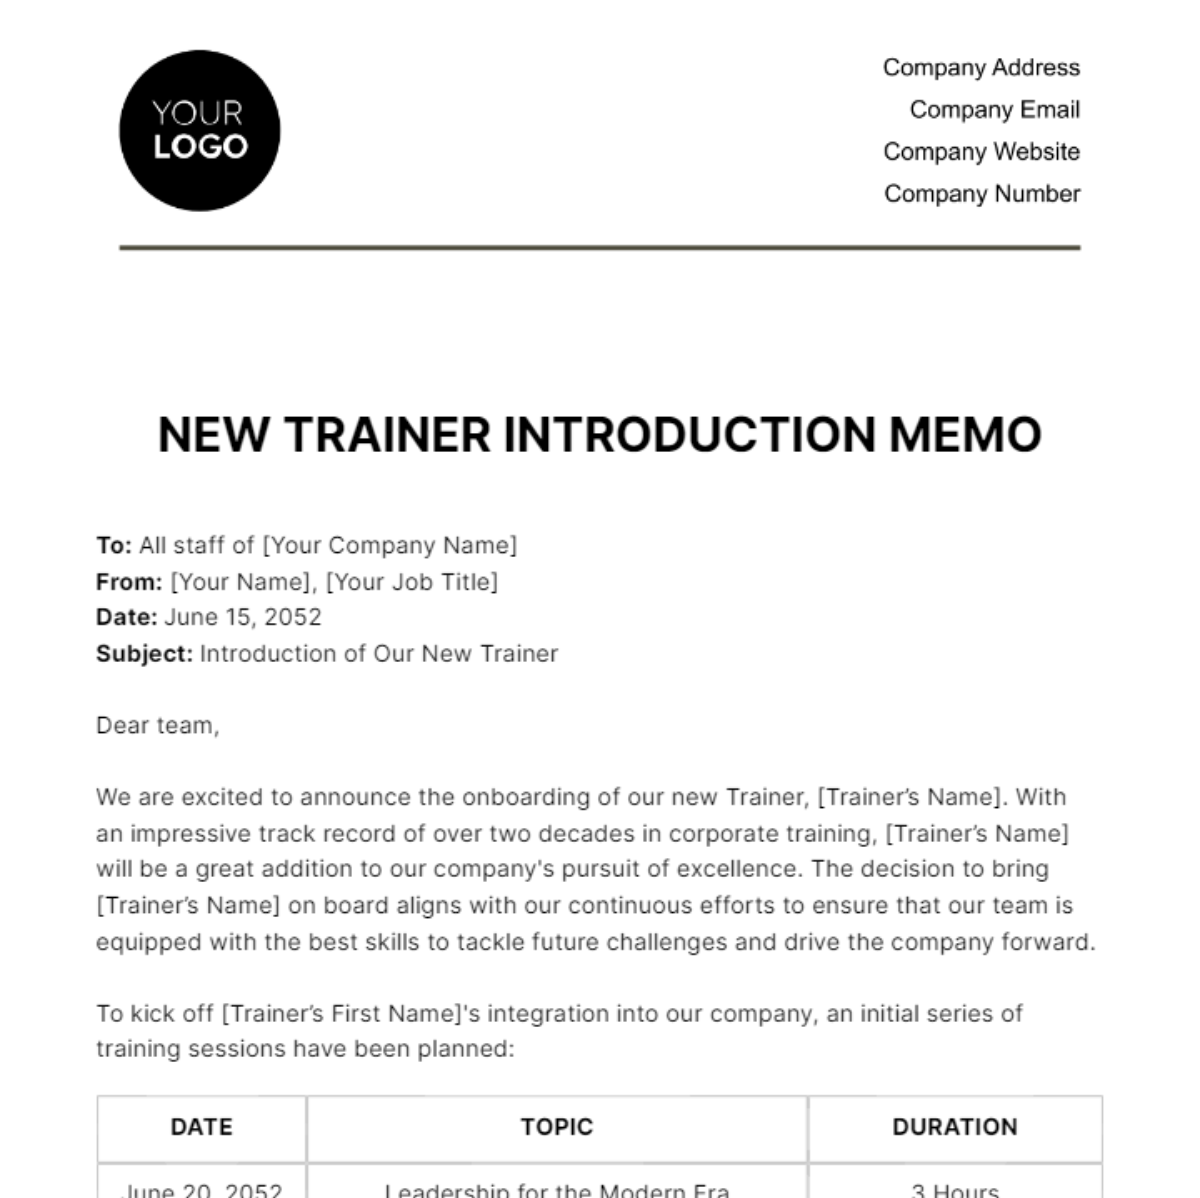 Free New Trainer Introduction Memo HR Template